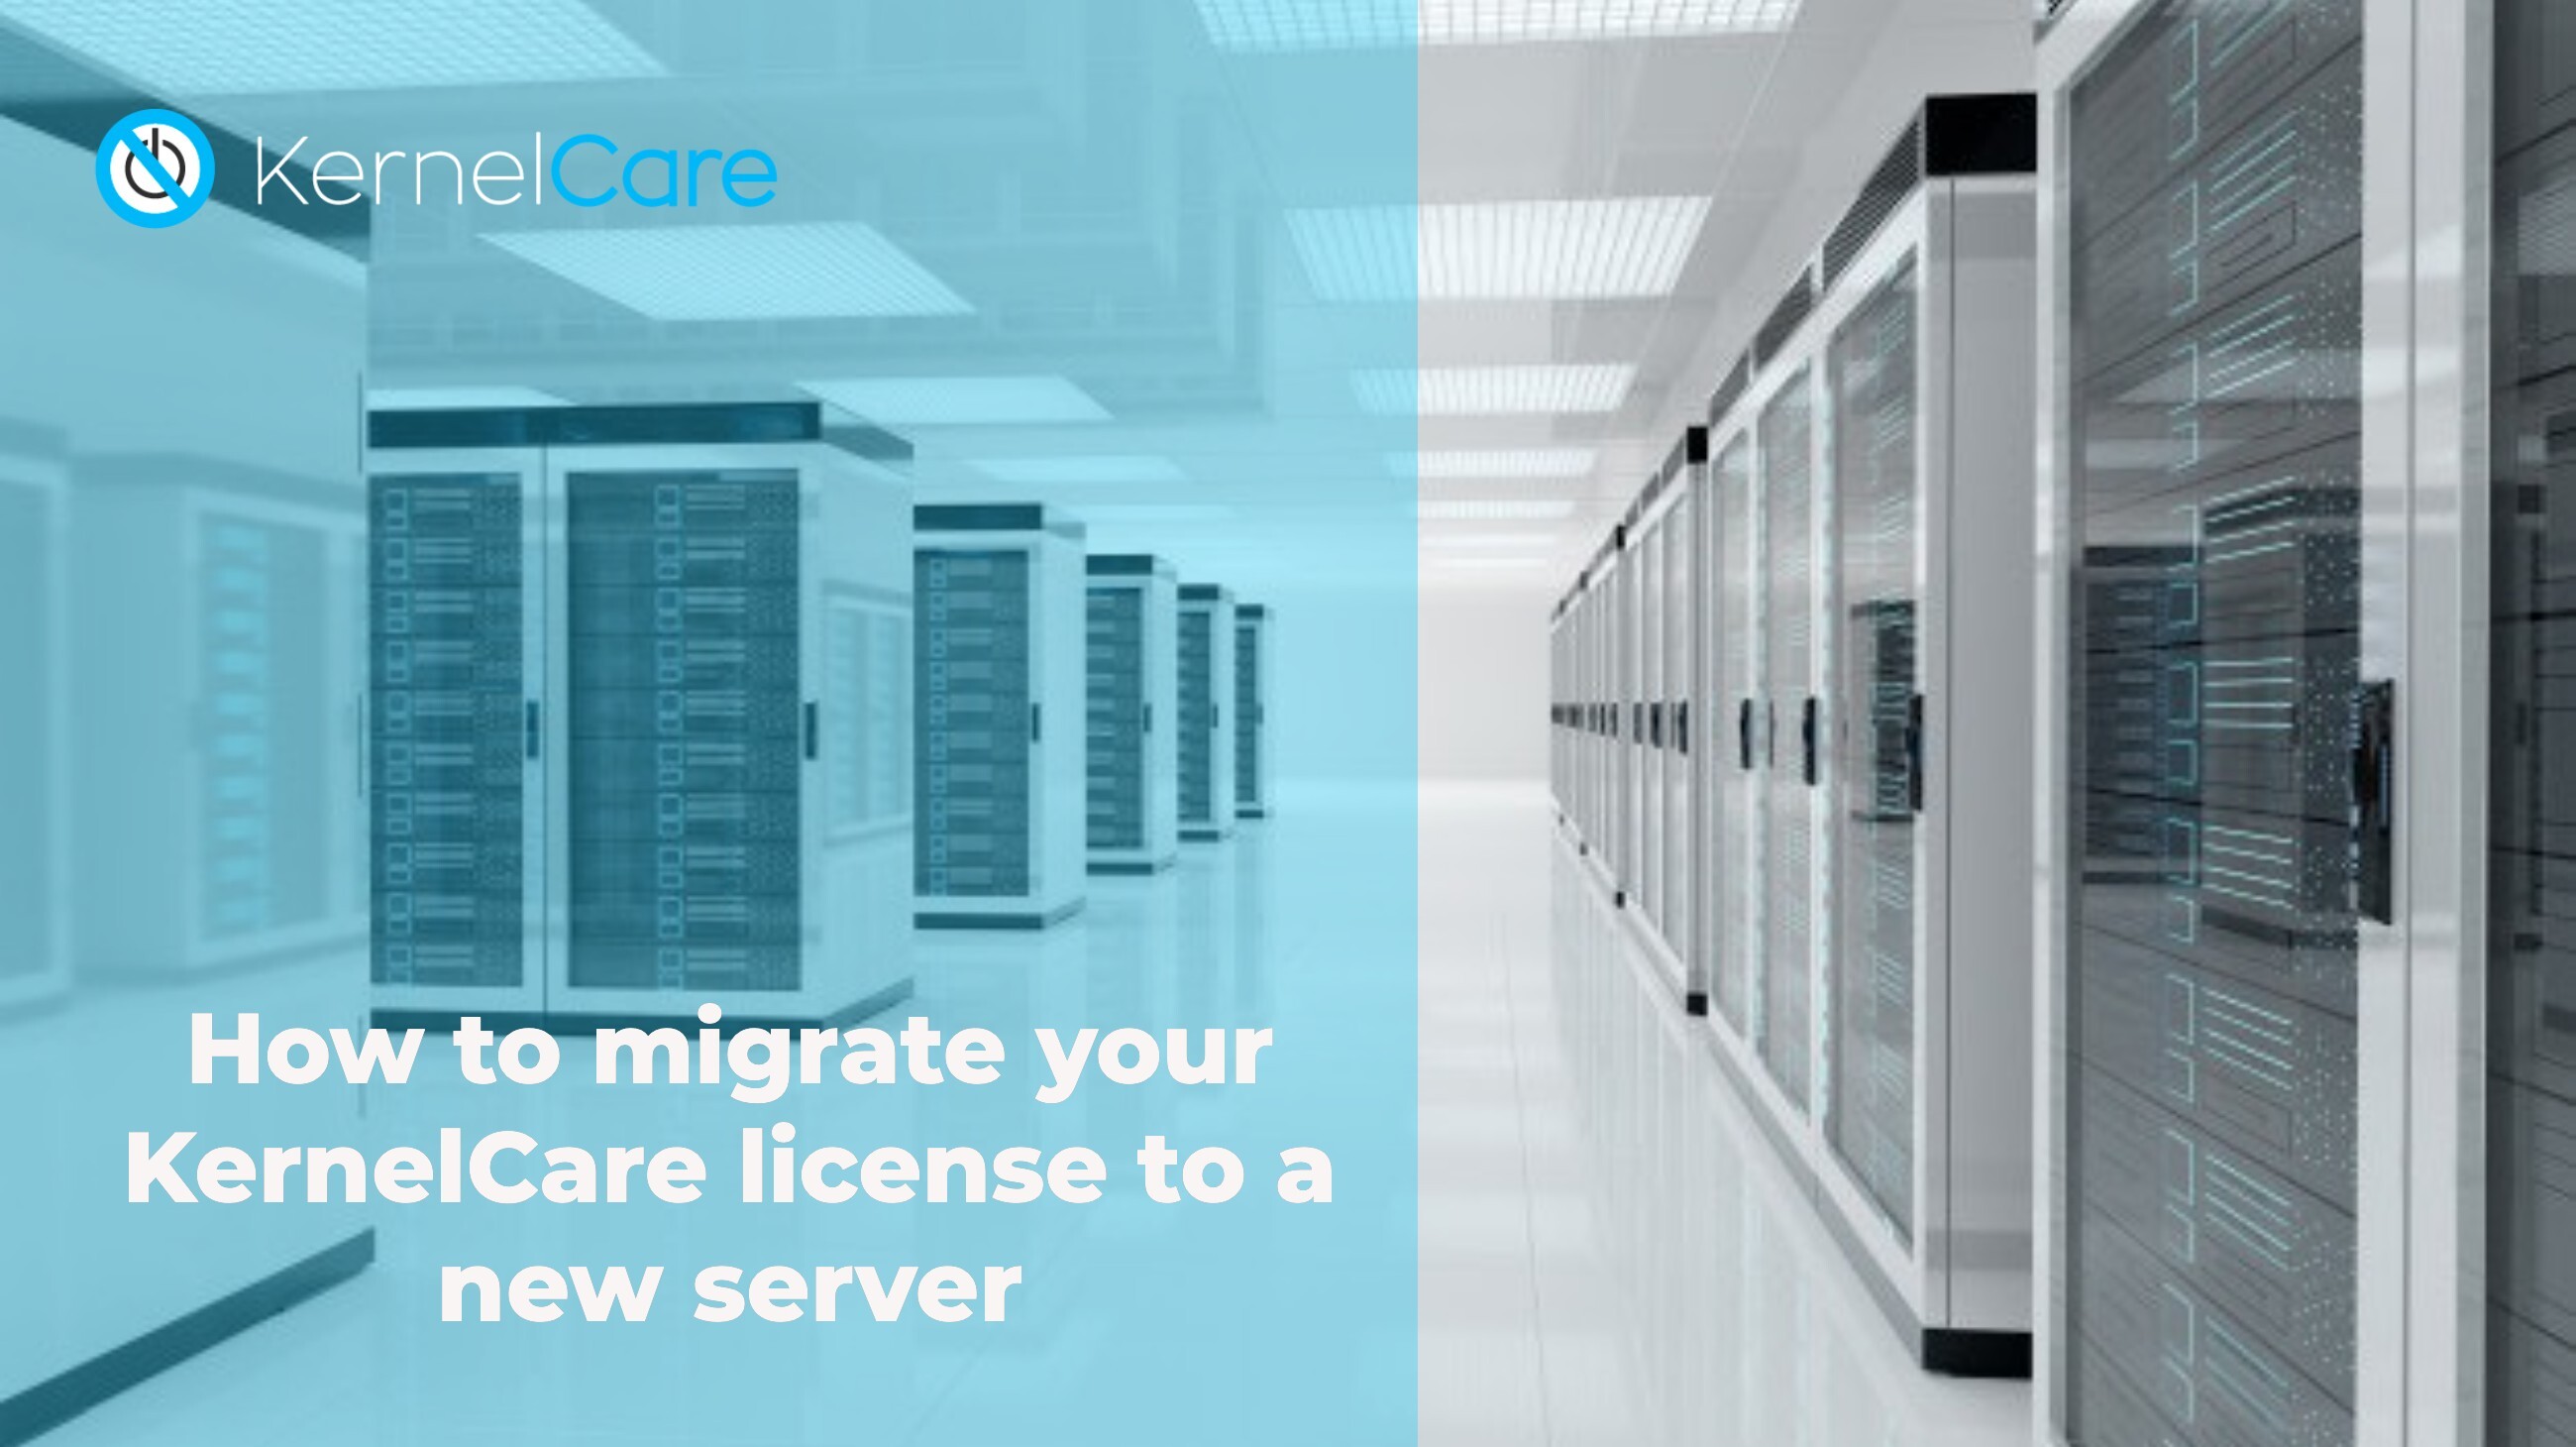 How to migrate your KernelCare license to a new server